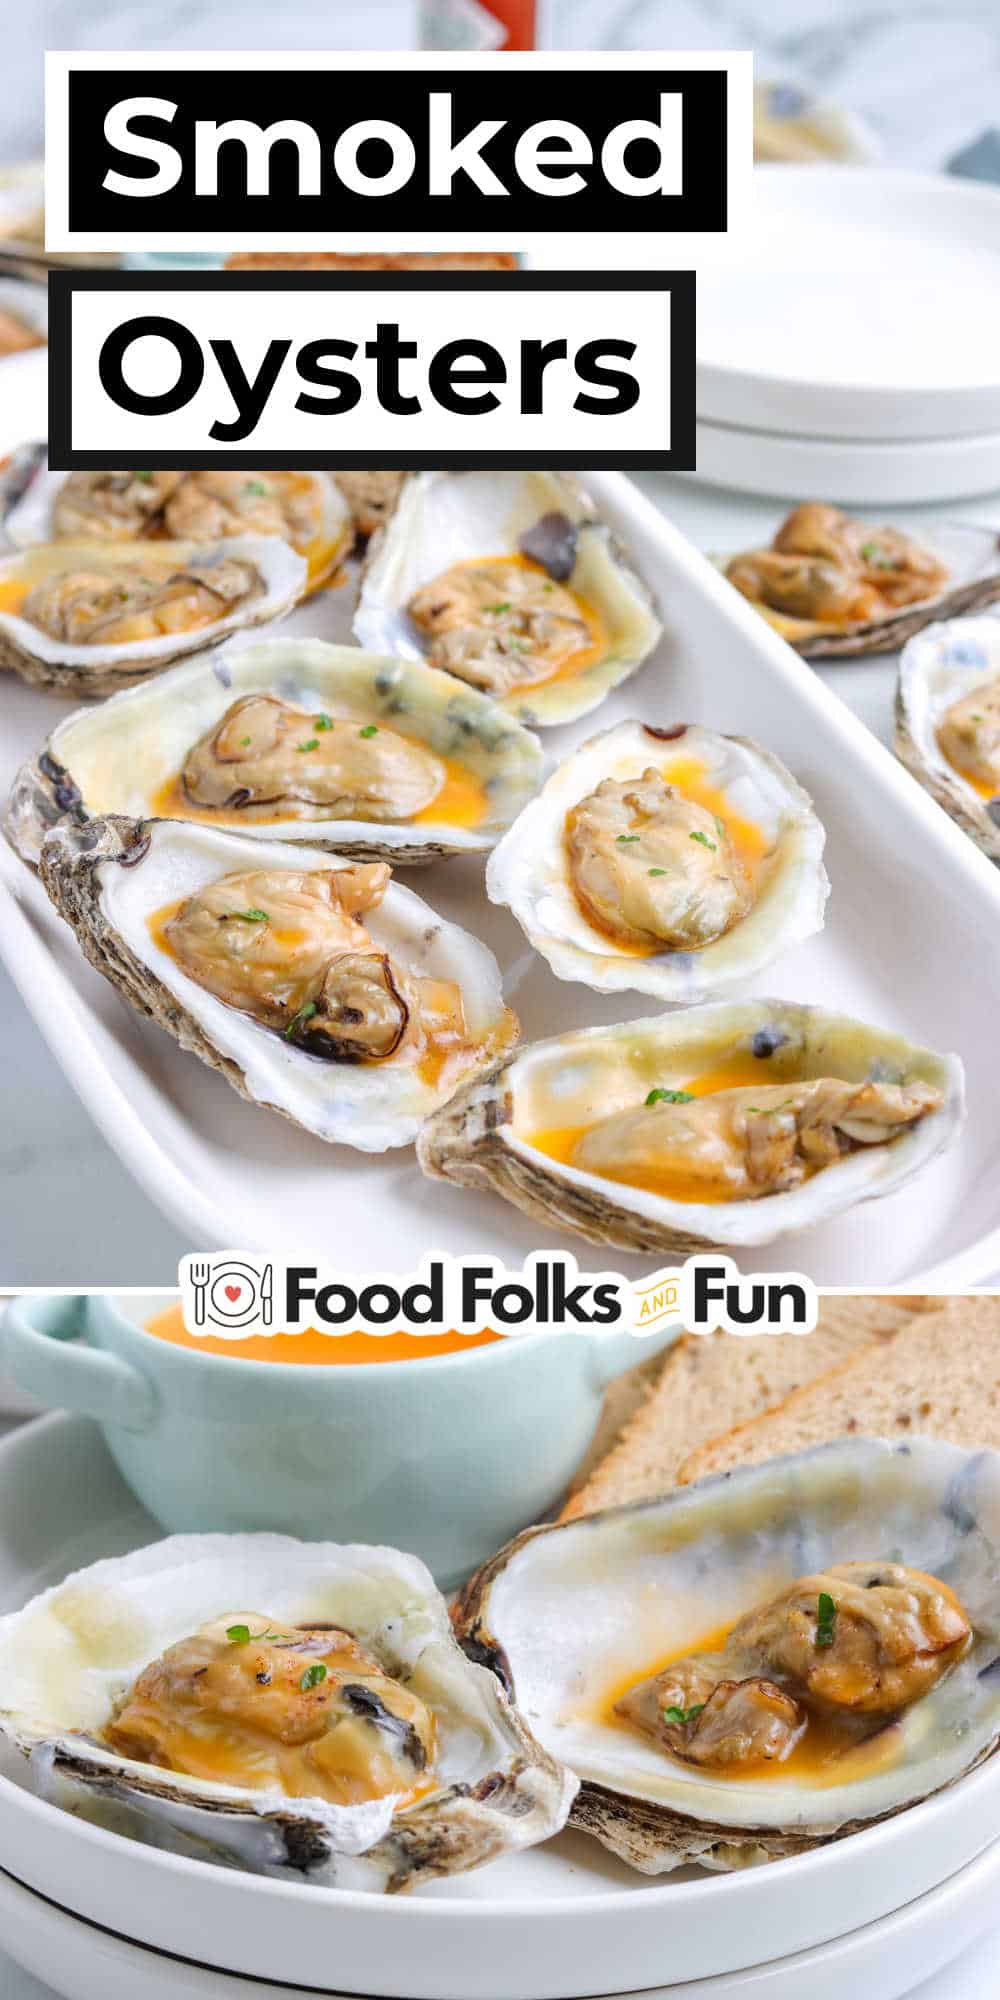 This five-star recipe for Smoked Oysters will impress your friends and family, giving you great pride in your cooking abilities. via @foodfolksandfun